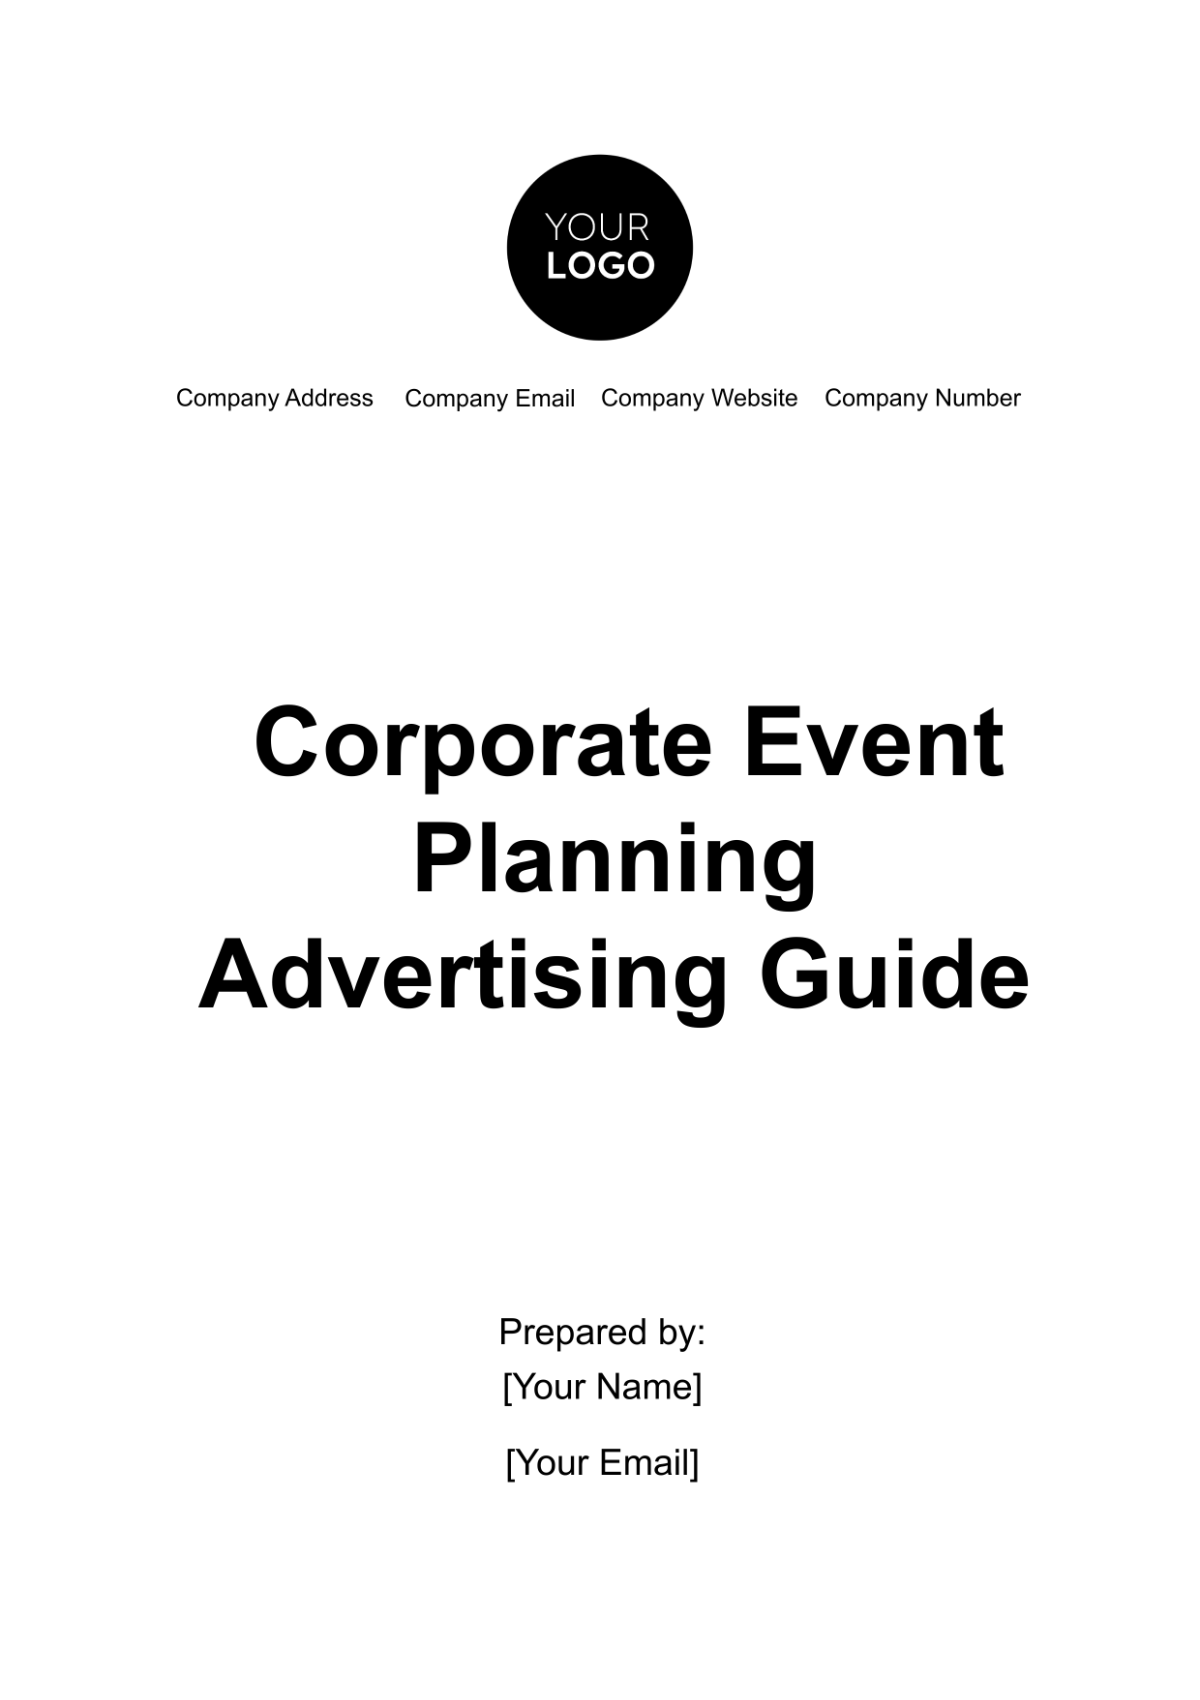 Corporate Event Planning Advertising Guide Template